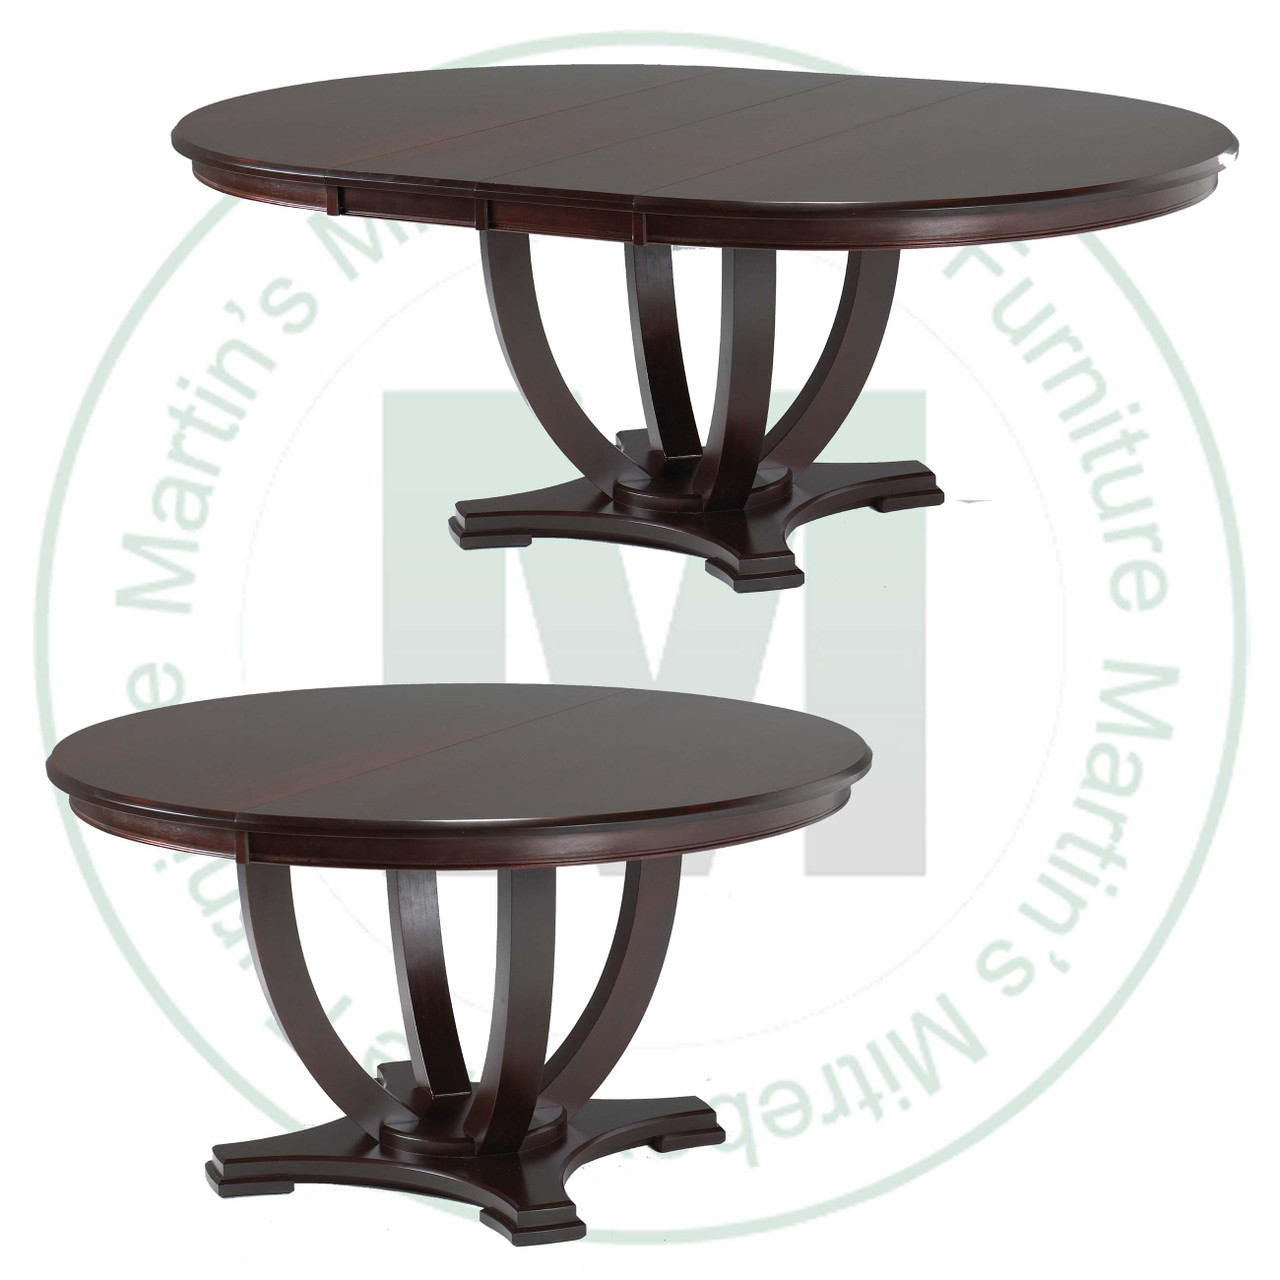 Maple Tuscany Single Pedestal Table 54''D x 54''W x 30''H With 3 - 12'' Leaves